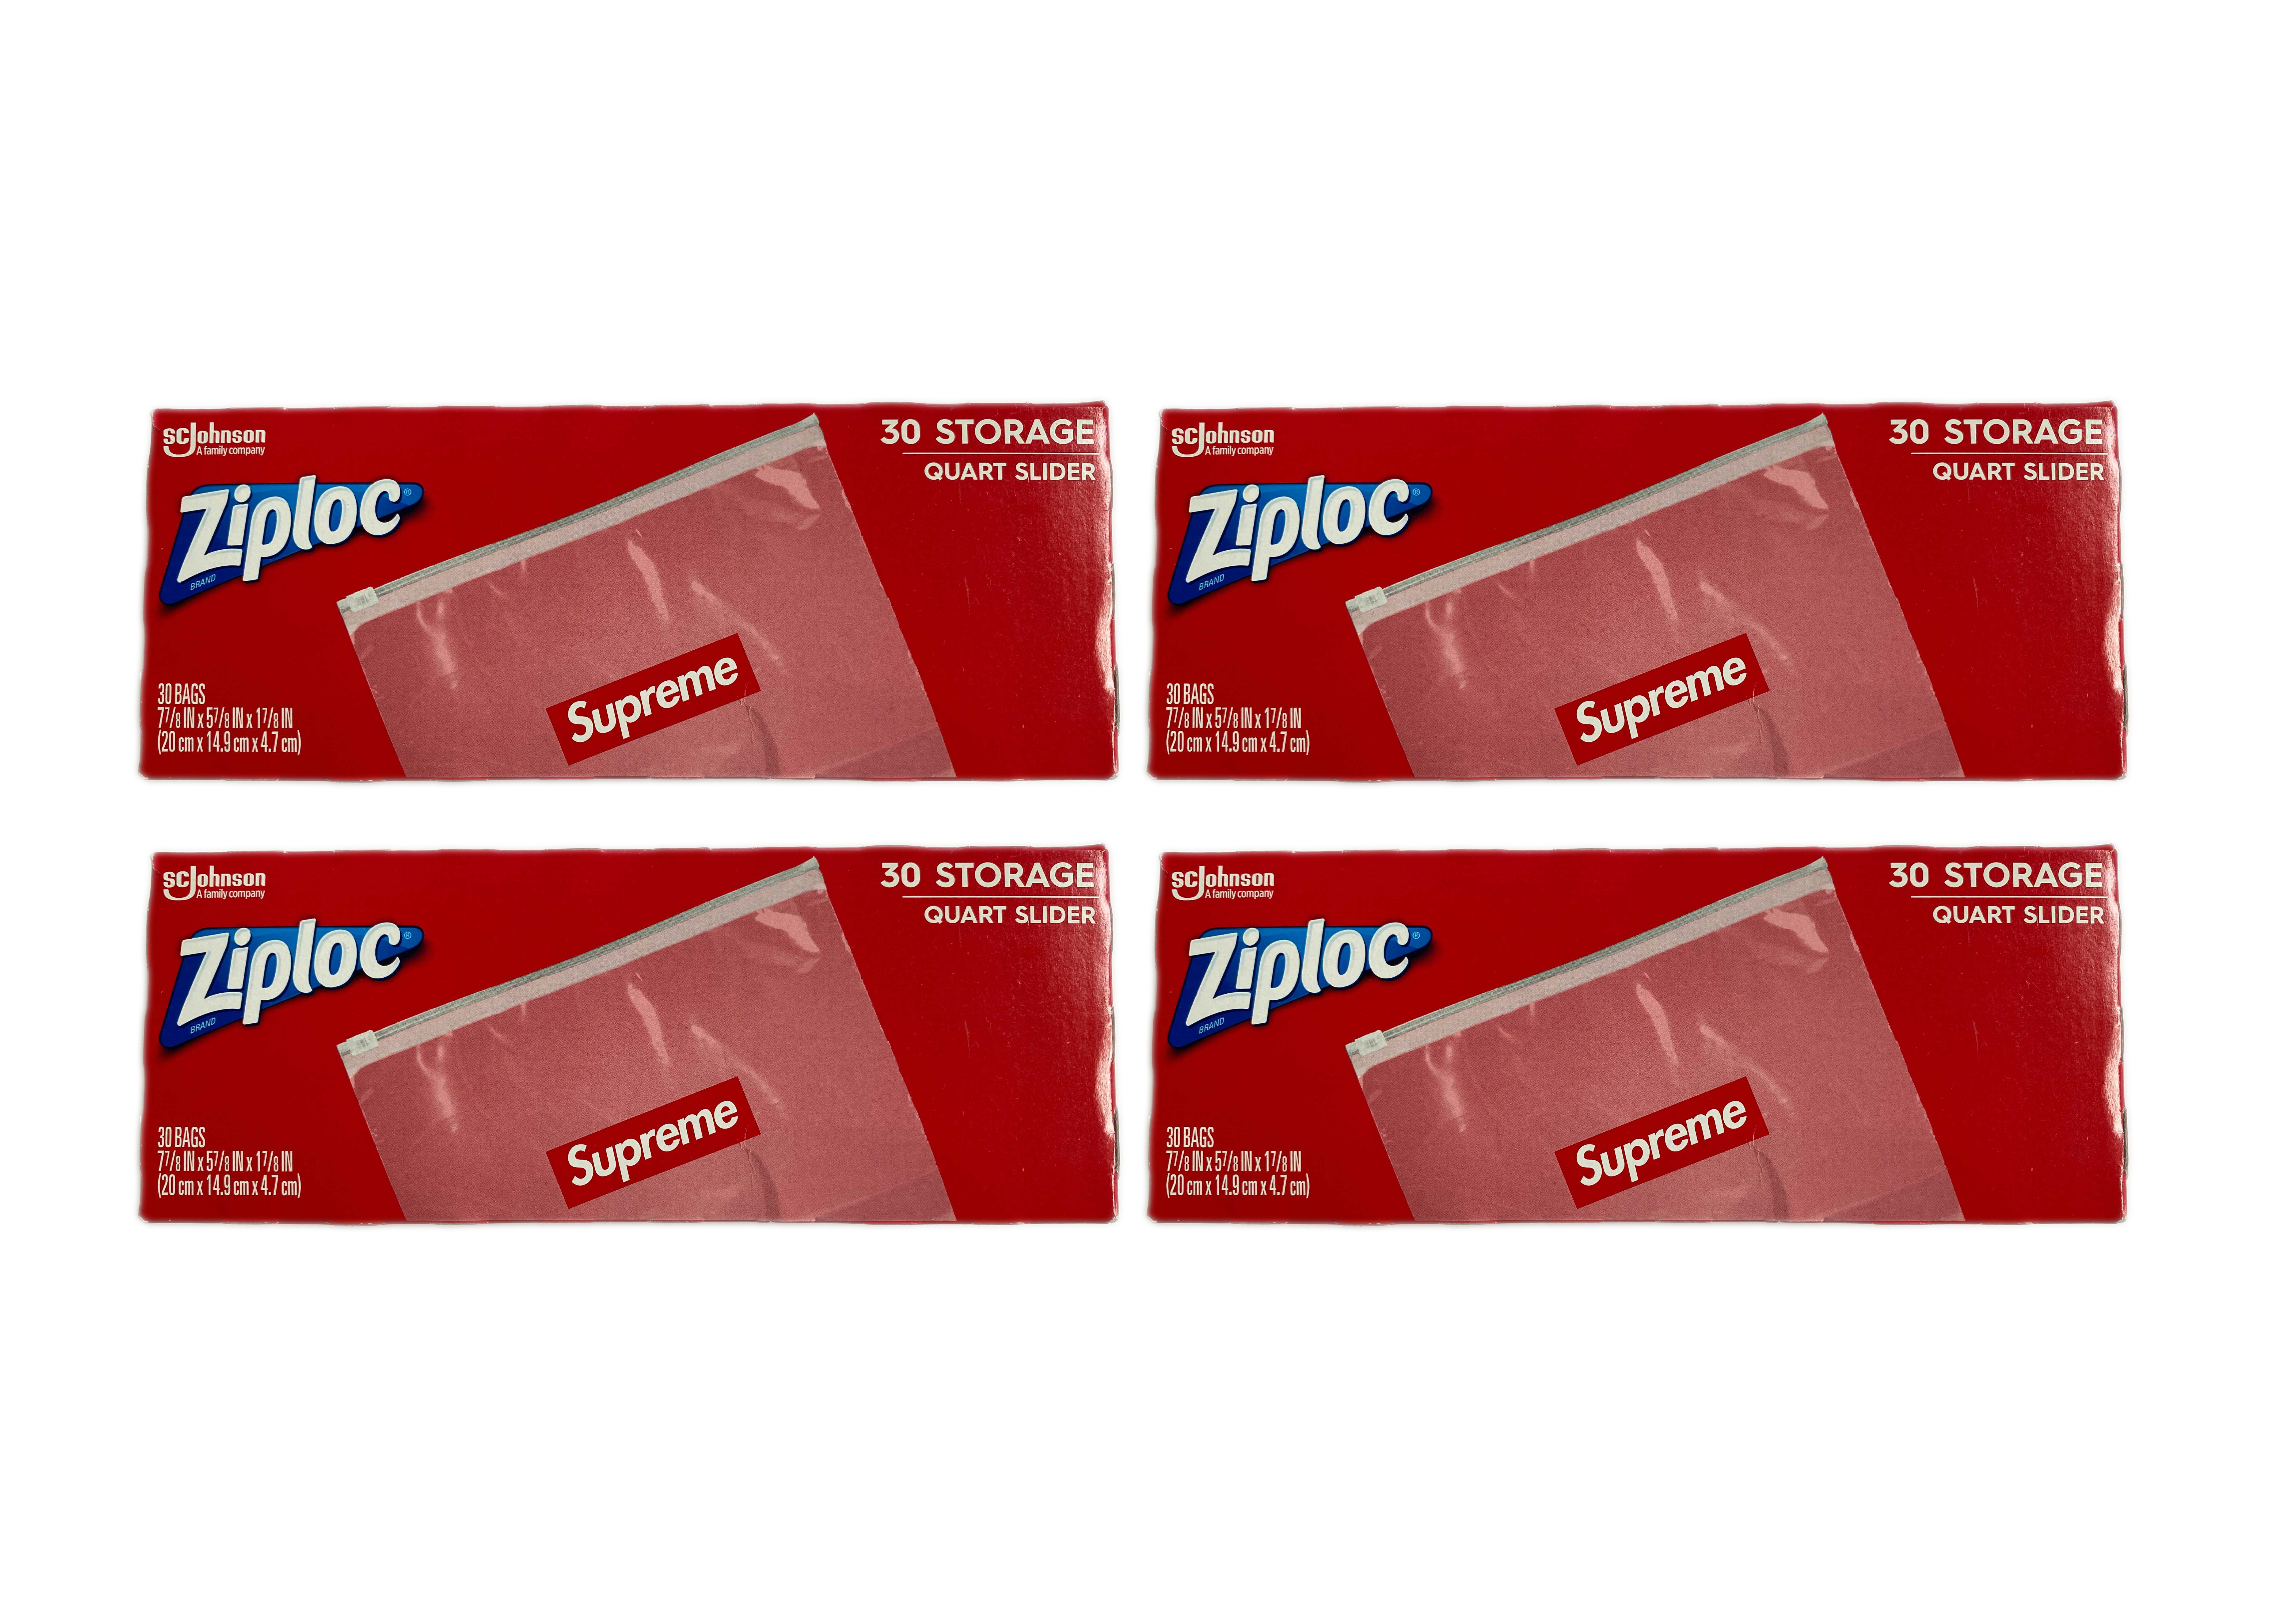 Confirmed Order Details about   Supreme®/Ziploc® Bags Box of 30 